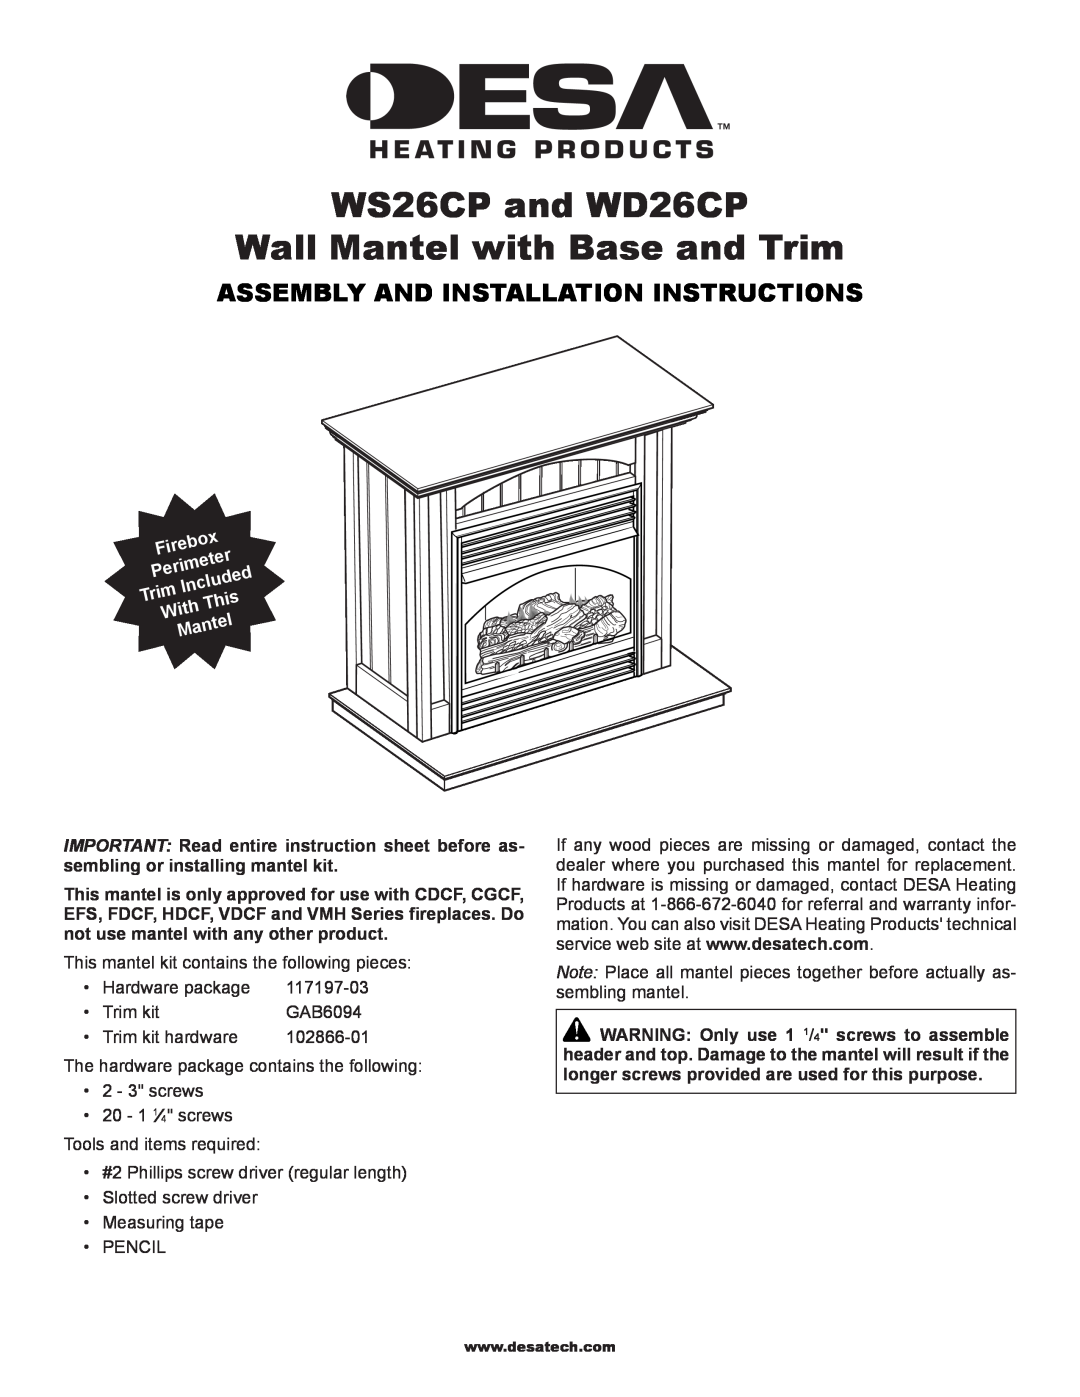 Desa installation instructions WS26CP and WD26CP Wall Mantel with Base and Trim, Assembly And Installation Instructions 